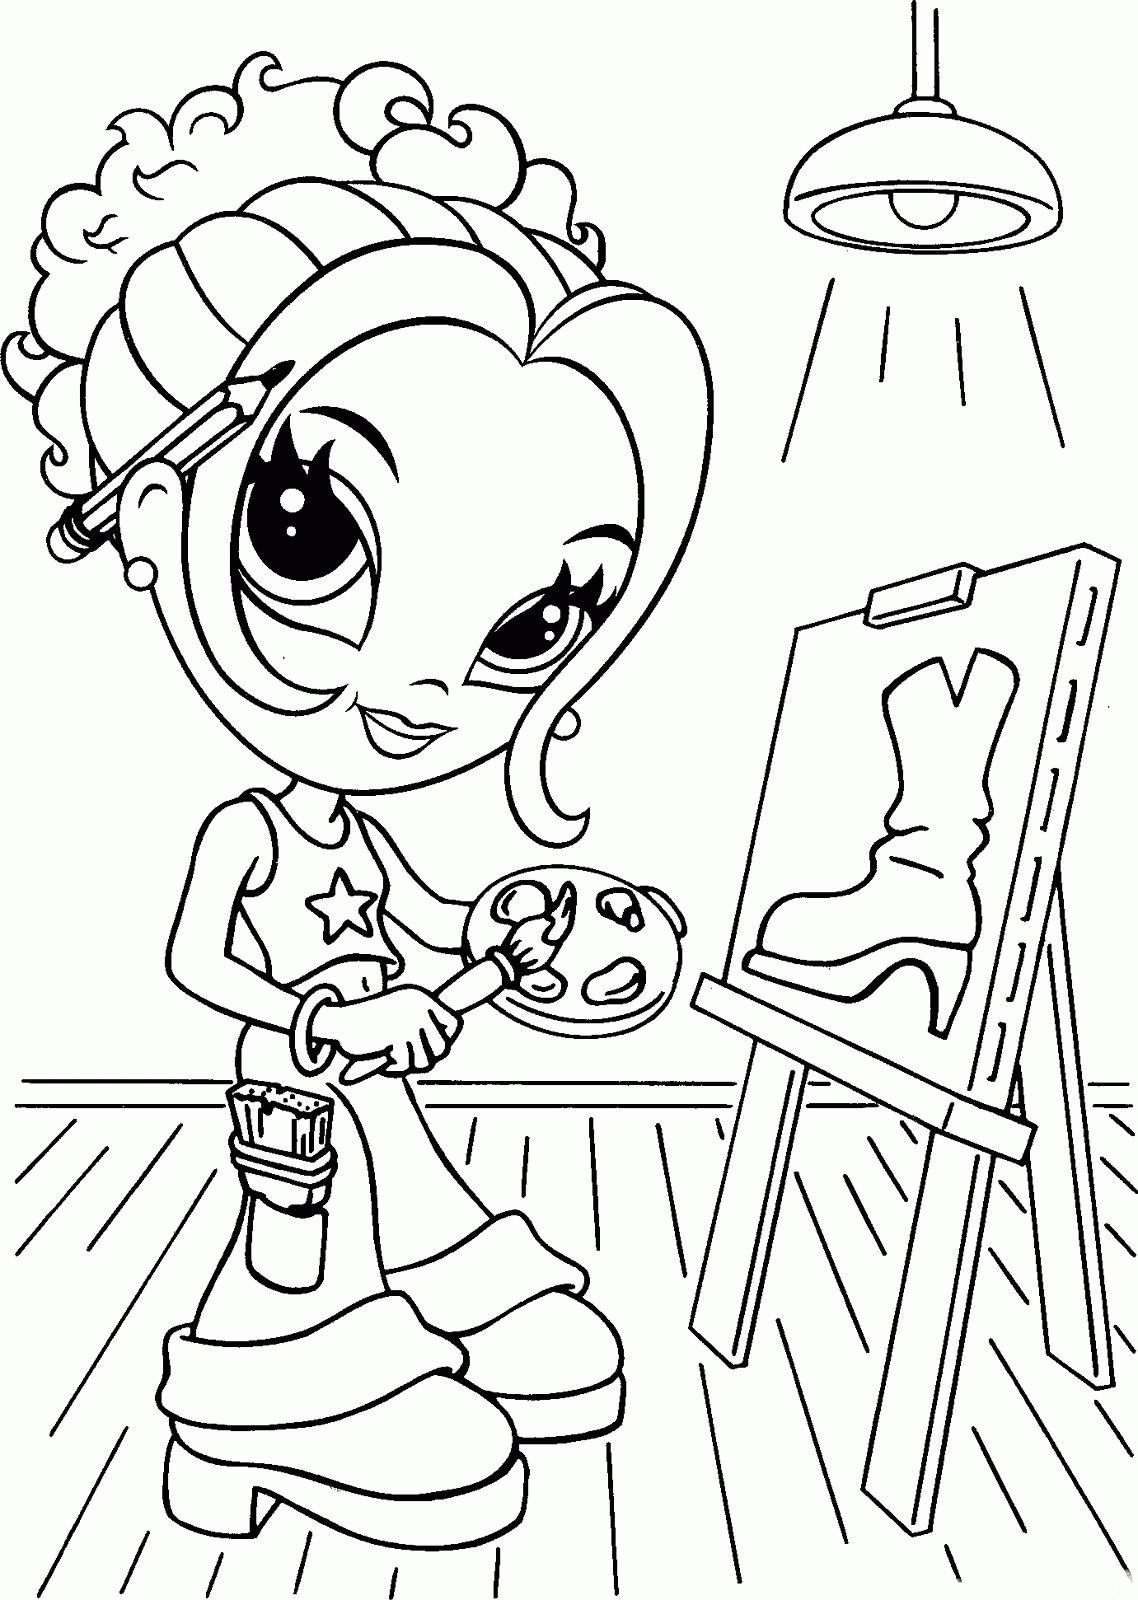 Printable Lisa Frank | Coloring Pages for Kids and for Adults